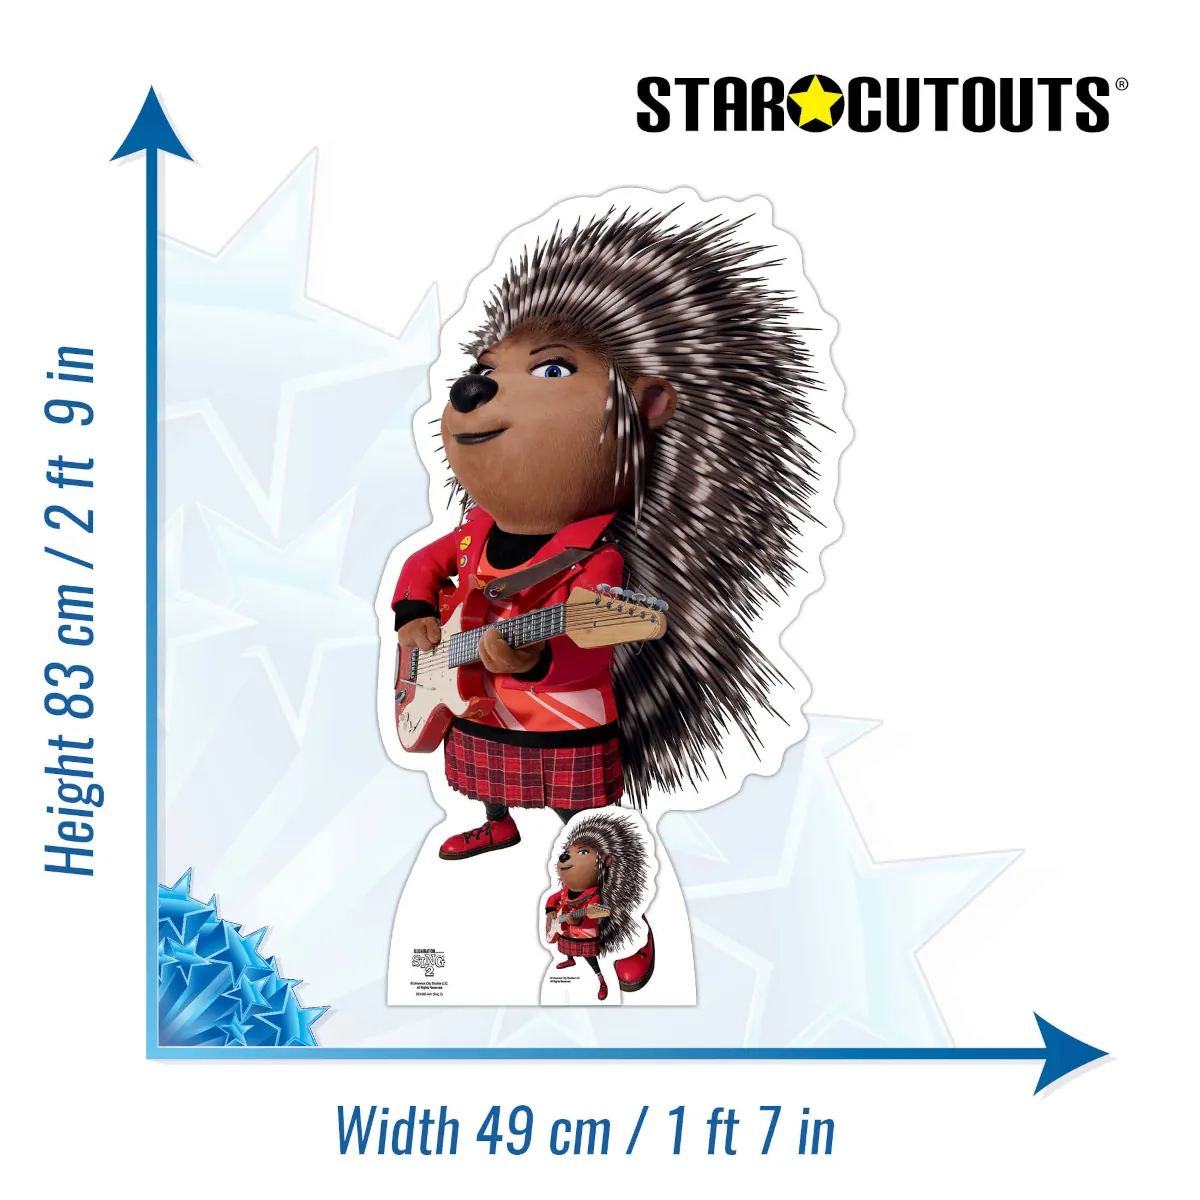 SC4083 Ash Porcupine (Sing 2) Official Lifesize + Mini Cardboard Cutout Standee Size